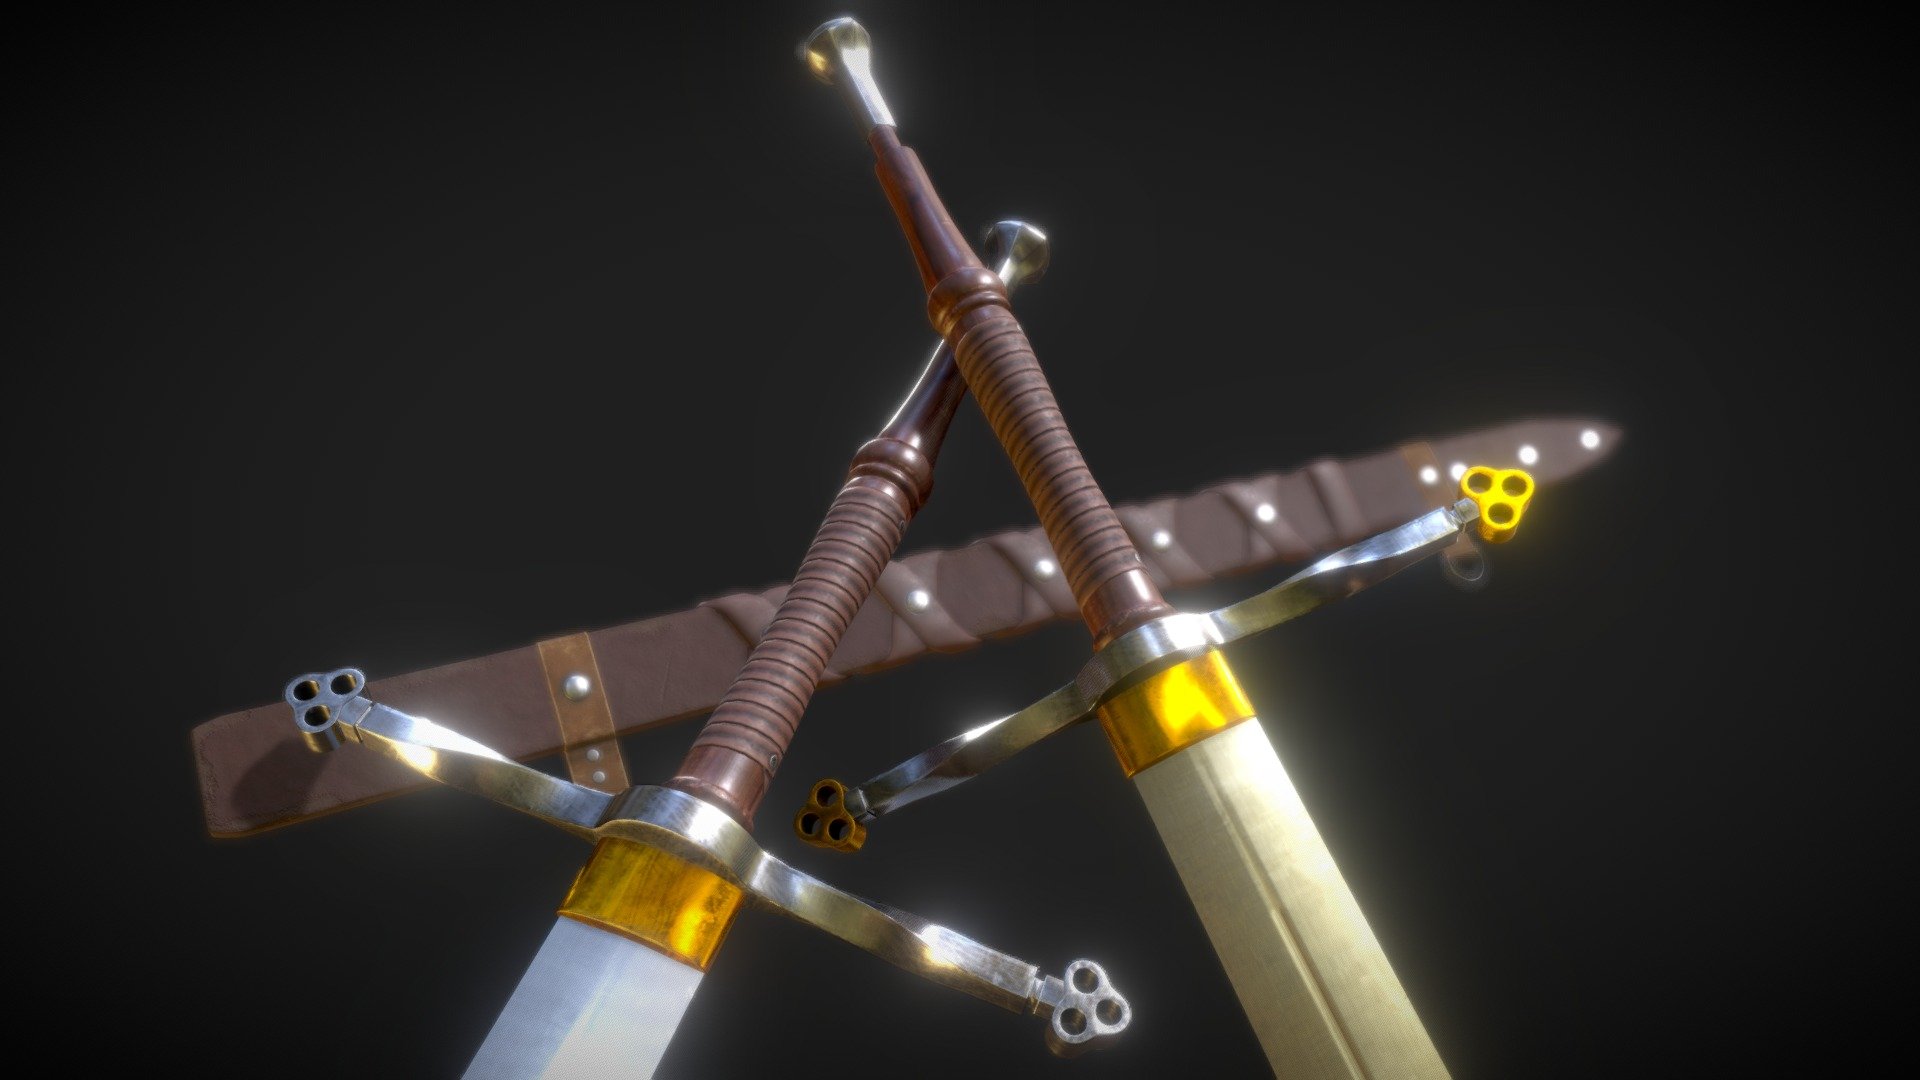 This is the 3d model of Zweihander(2 hand) sword, for use in animations, renders, games, printing&hellip; etc.

The rar files contains various file formats: 




.blend



Specifications:





Vertices: 5027

Polygons: 6132

Materials: 3

Textures: 15



Model including all PBR textures set.(512 - 4k)




Diffuse/Albedo

Metallic

Roughness

Normal(OpenGL, Direct x) 

Height 

Ambient Occlusion

The .blend file is the original version prepared to render.

Feel free to ask any question or request modifications.
Visit my profile to find more products.


Created in blender, Substance painter - European long sword - Download Free 3D model by (v•Ä•₼.P•†•R•È) (@nagi2427) 3d model